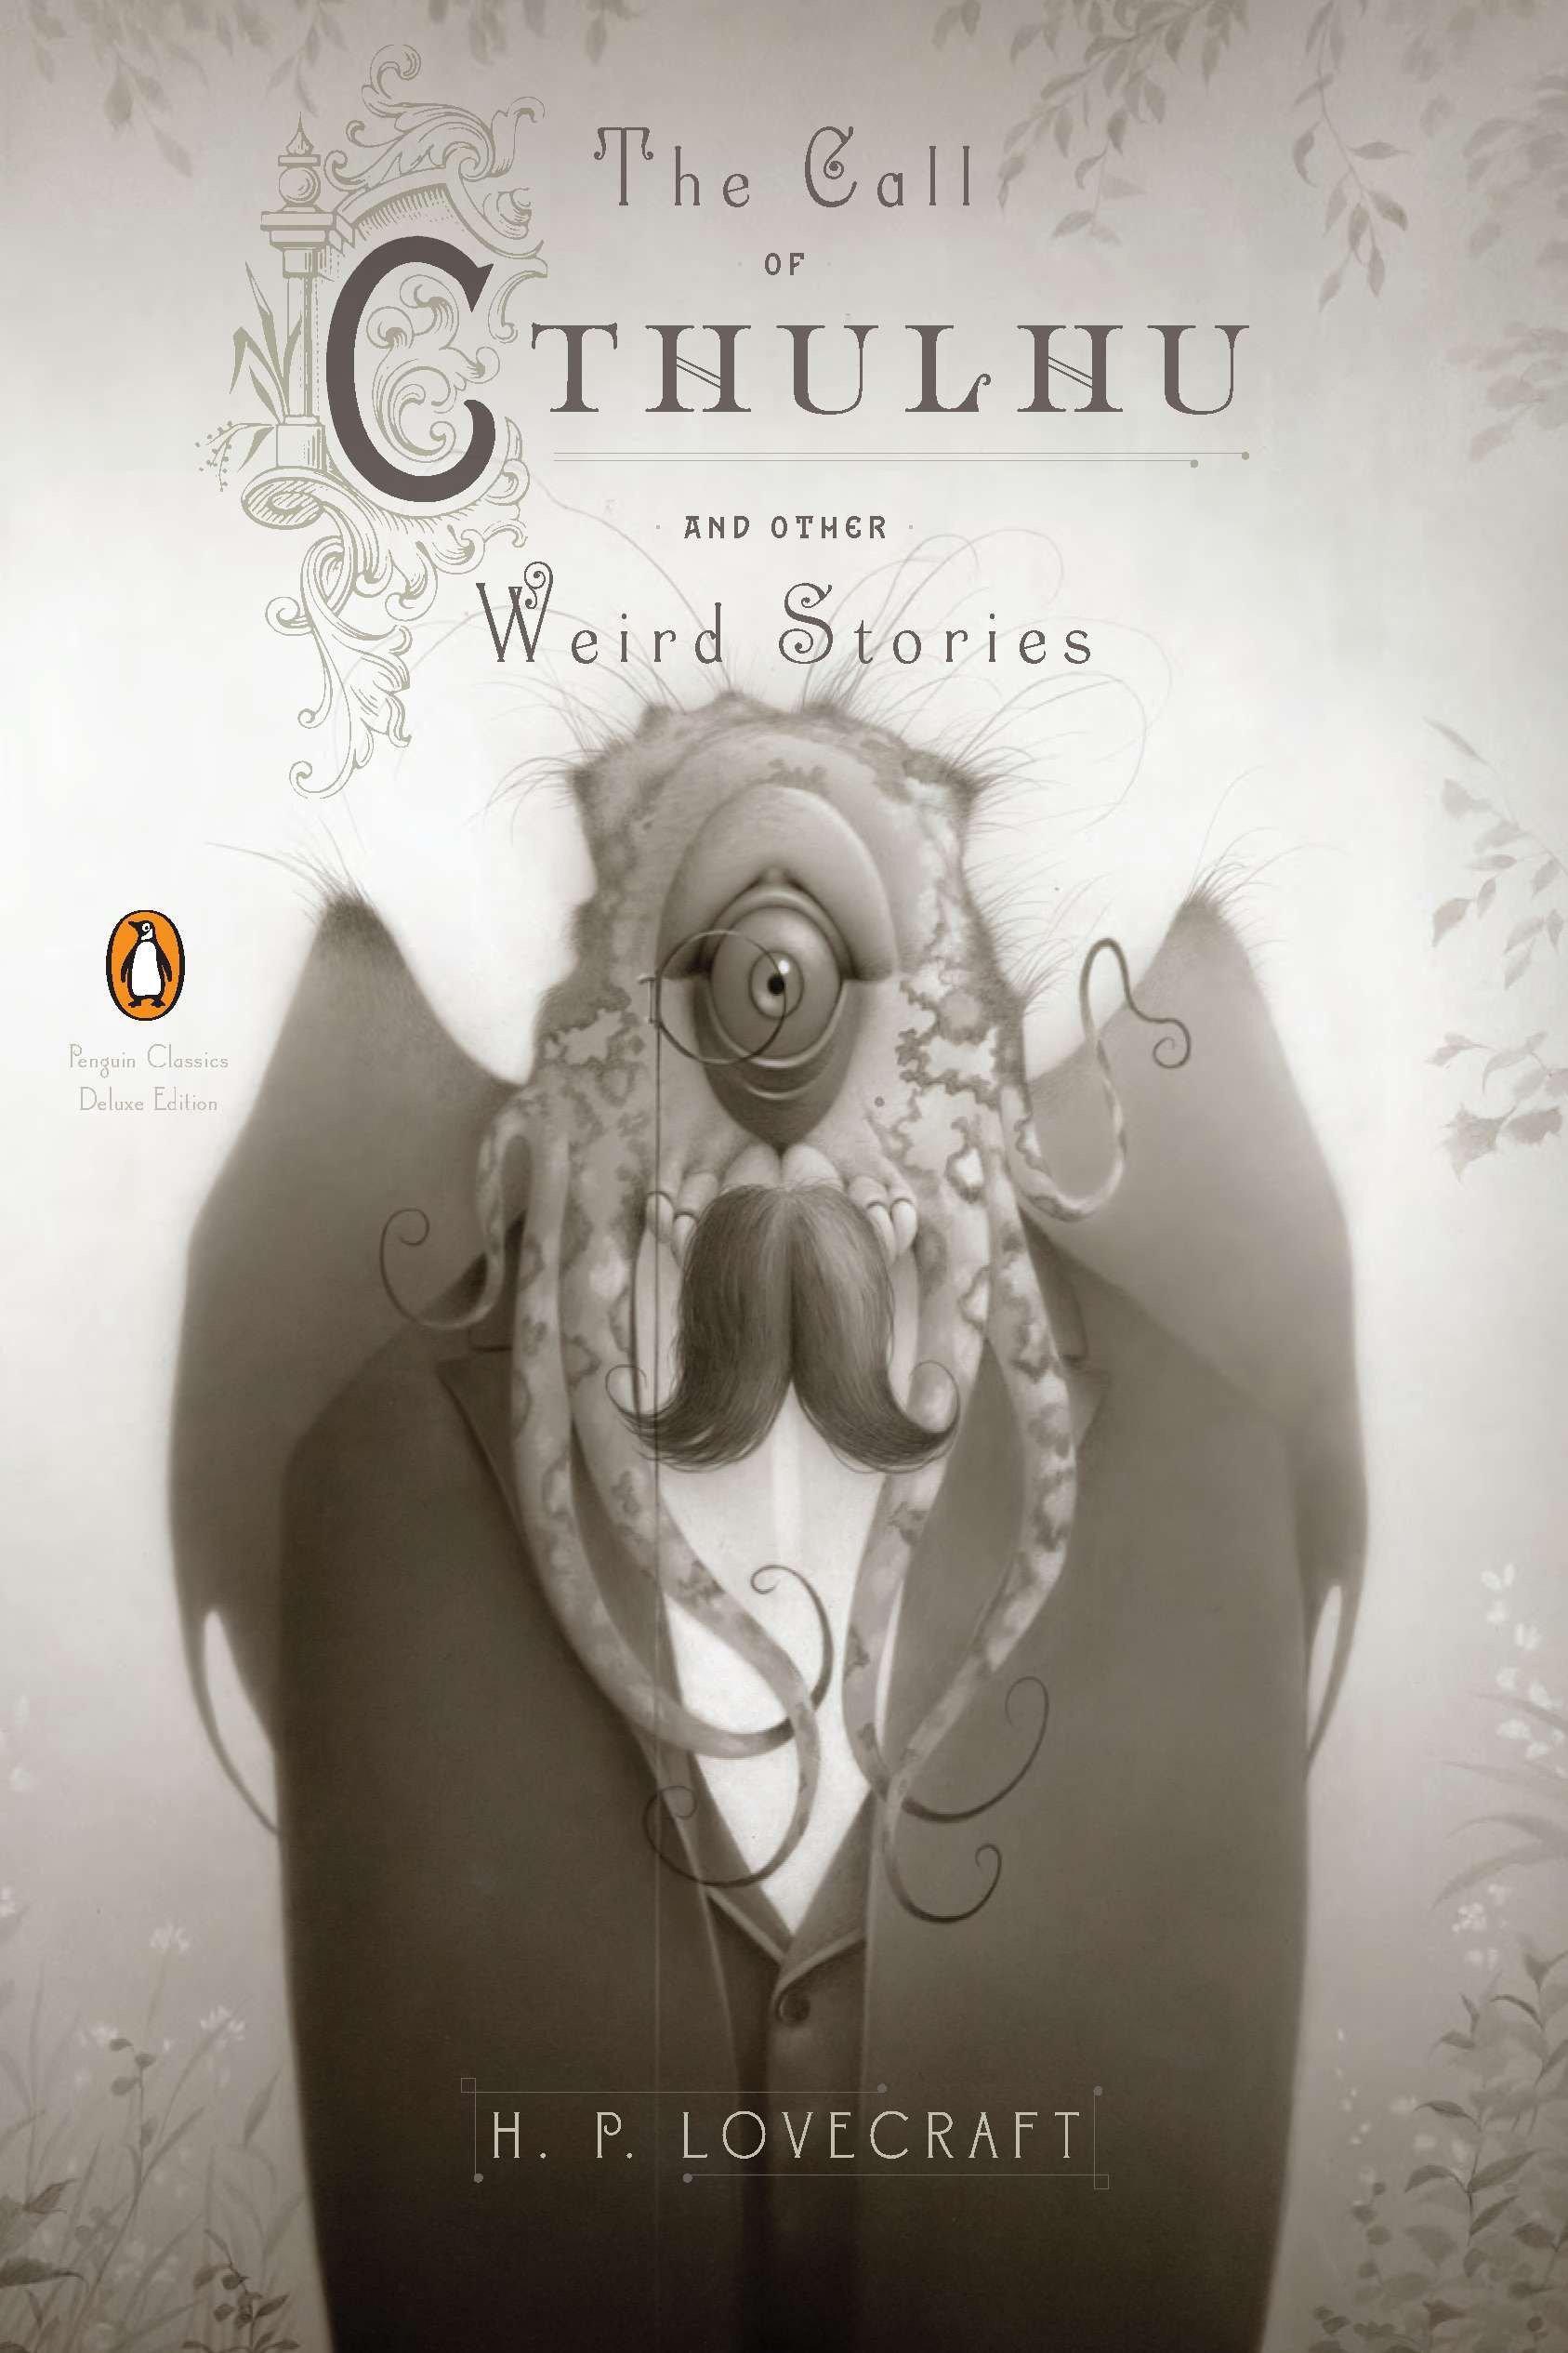 The Call of Cthulhu and Other Weird Stories. Deluxe Edition - H. P. Lovecraft